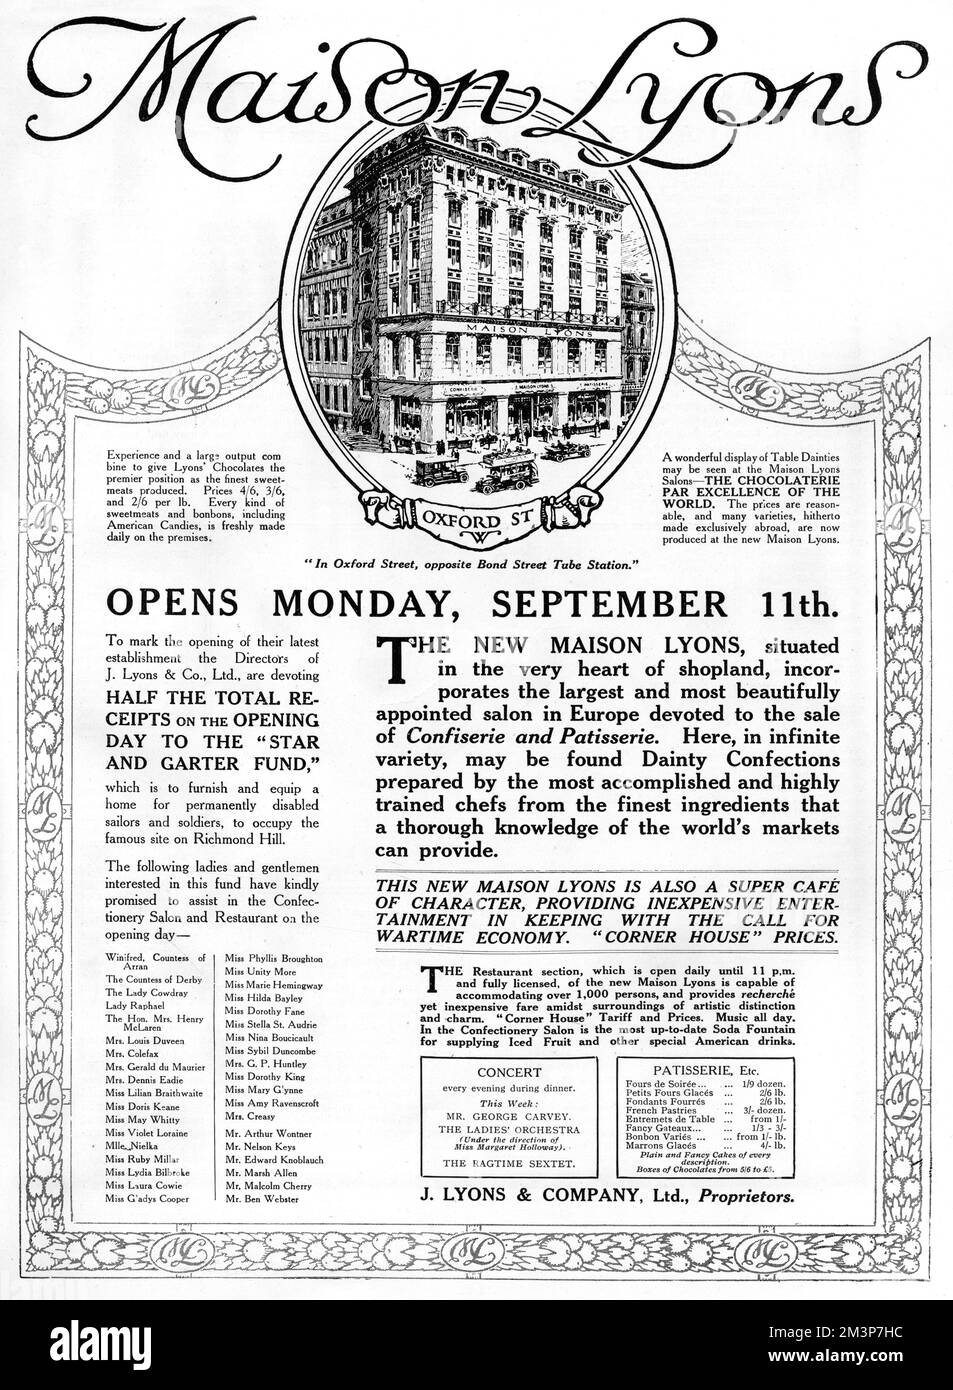 Advertisement for the opening of the latest branch of J. Lyons &amp; Co, in Oxford Street, London, opposite Bond Street tube station.  Devoted to the sale of Confiserie and Patisserie, the cafe offered 'dainty confections prepared by the most accomplished and highly trained chefs.'  The restaurant section was open daily until 11 pm and full licensed and capable of accommodating 1000 people.  To mark the opening of their latest establishment the Director were devoting half the total receipts on the opening day to the Star and Garter Fund to furnish and equip a home for permanently disabled sail Stock Photo